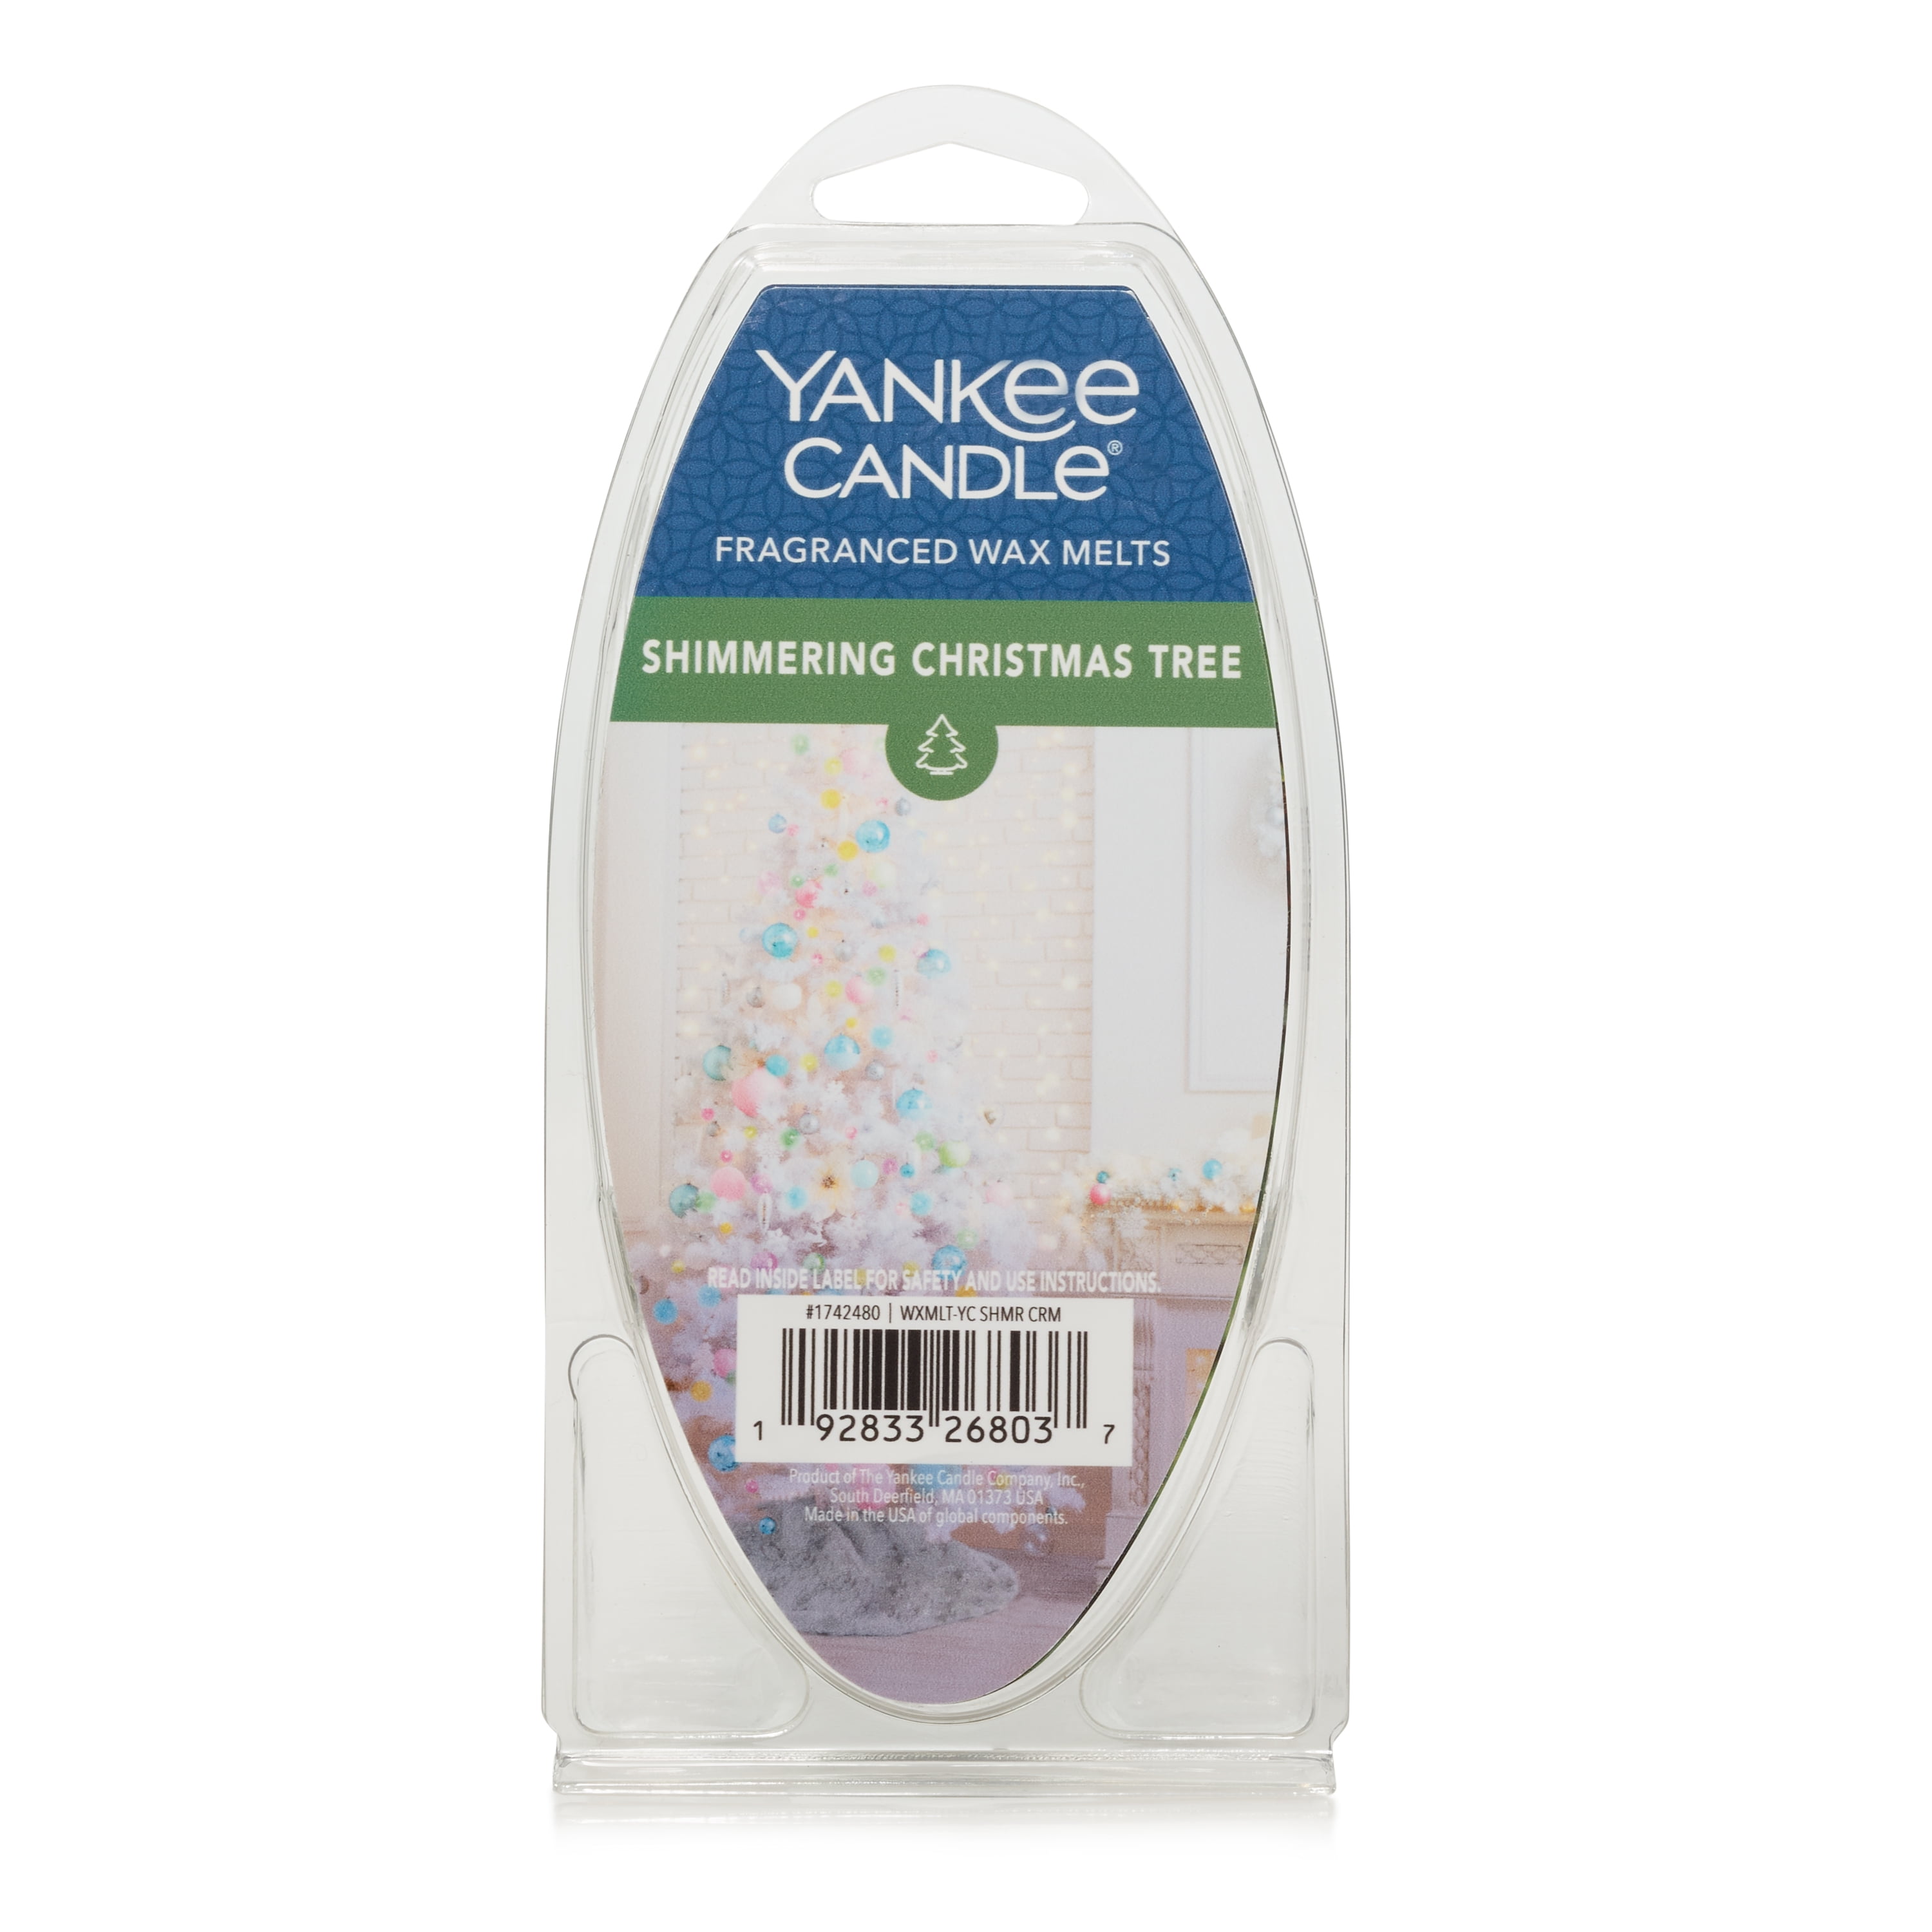 Yankee Candle is offering a bundle of 96 Christmas wax melts for just £15